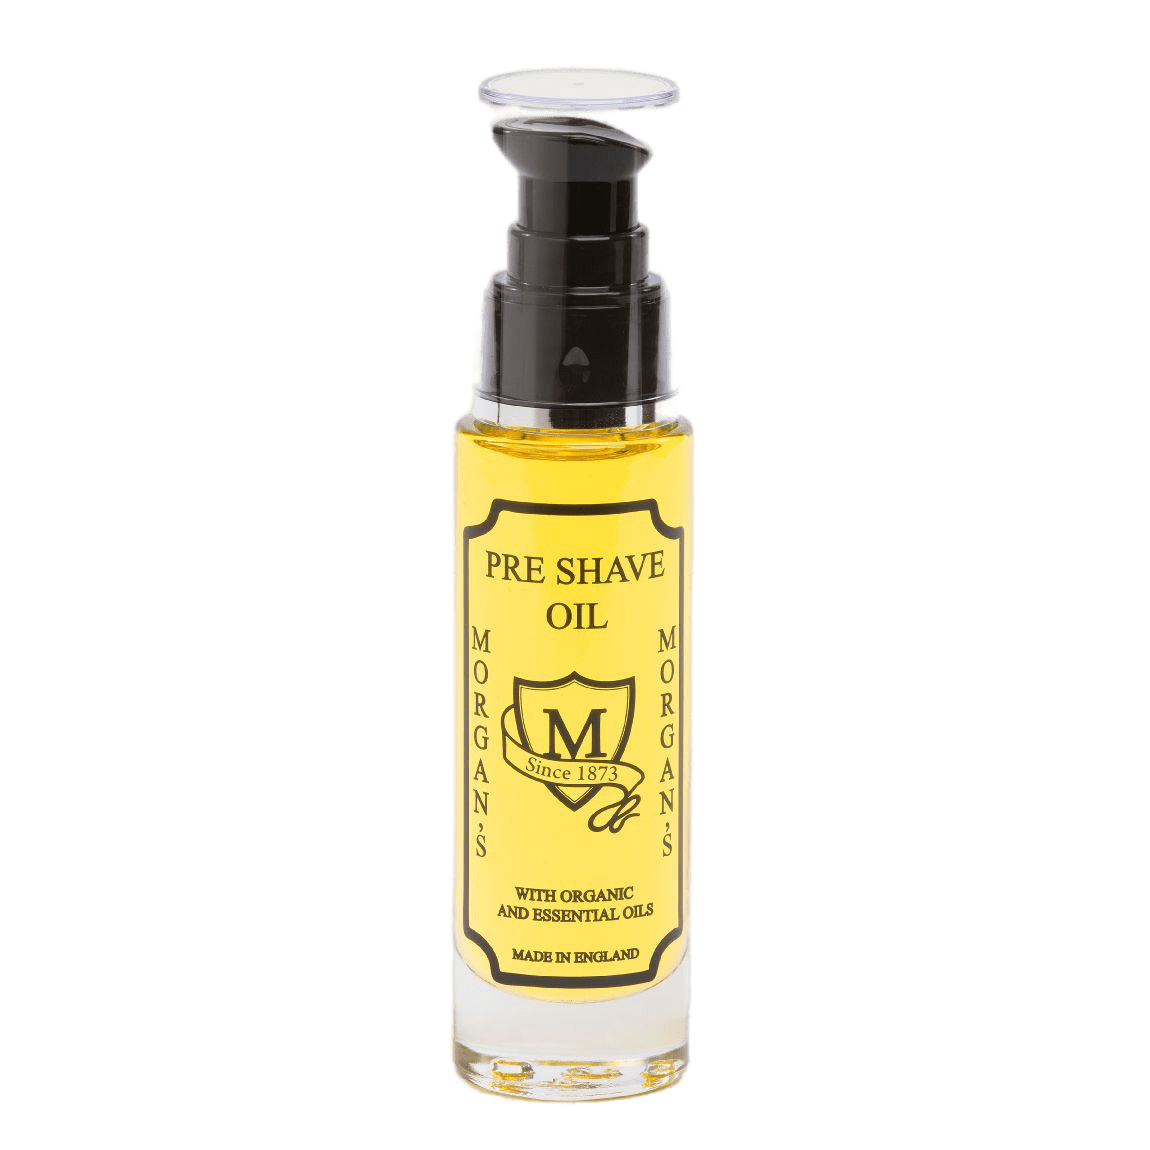 Morgan's Pre Shave Oil Mix of Organic and Essential Oils